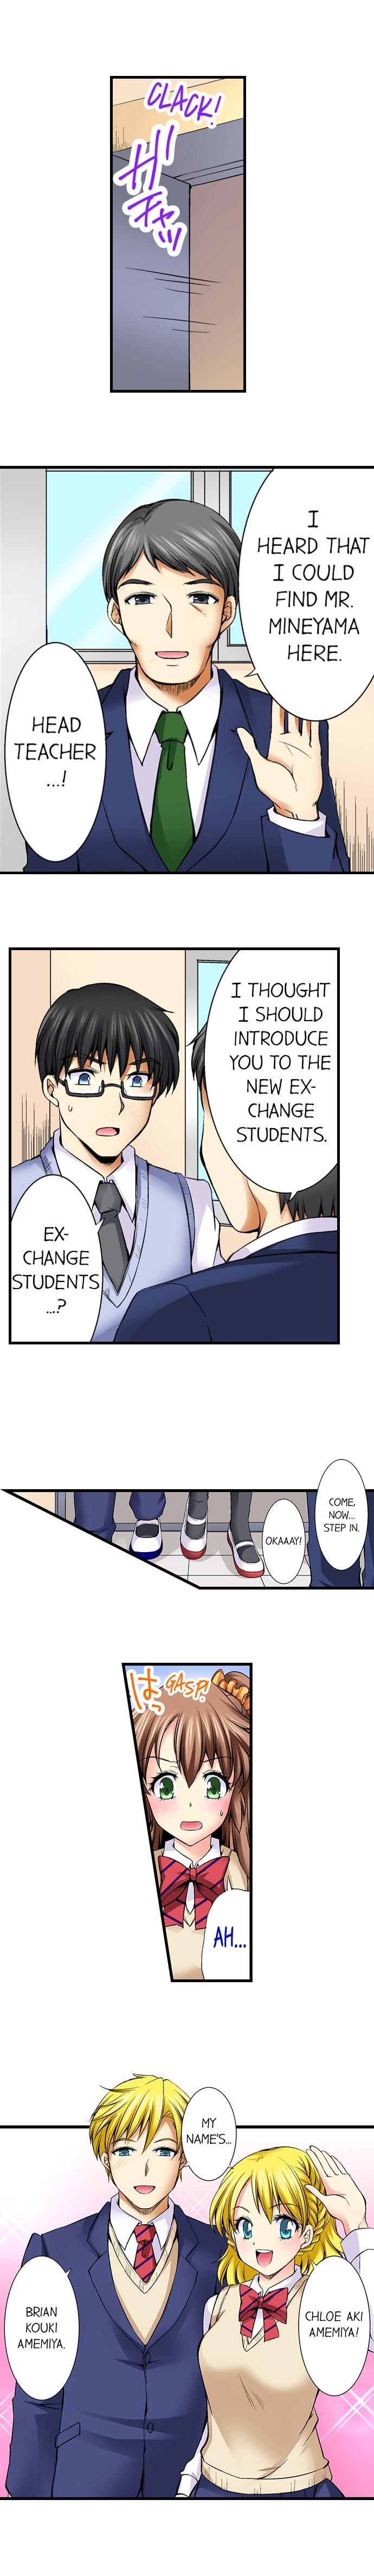 Why Can't i Have Sex With My Teacher? - Chapter 19 Page 2